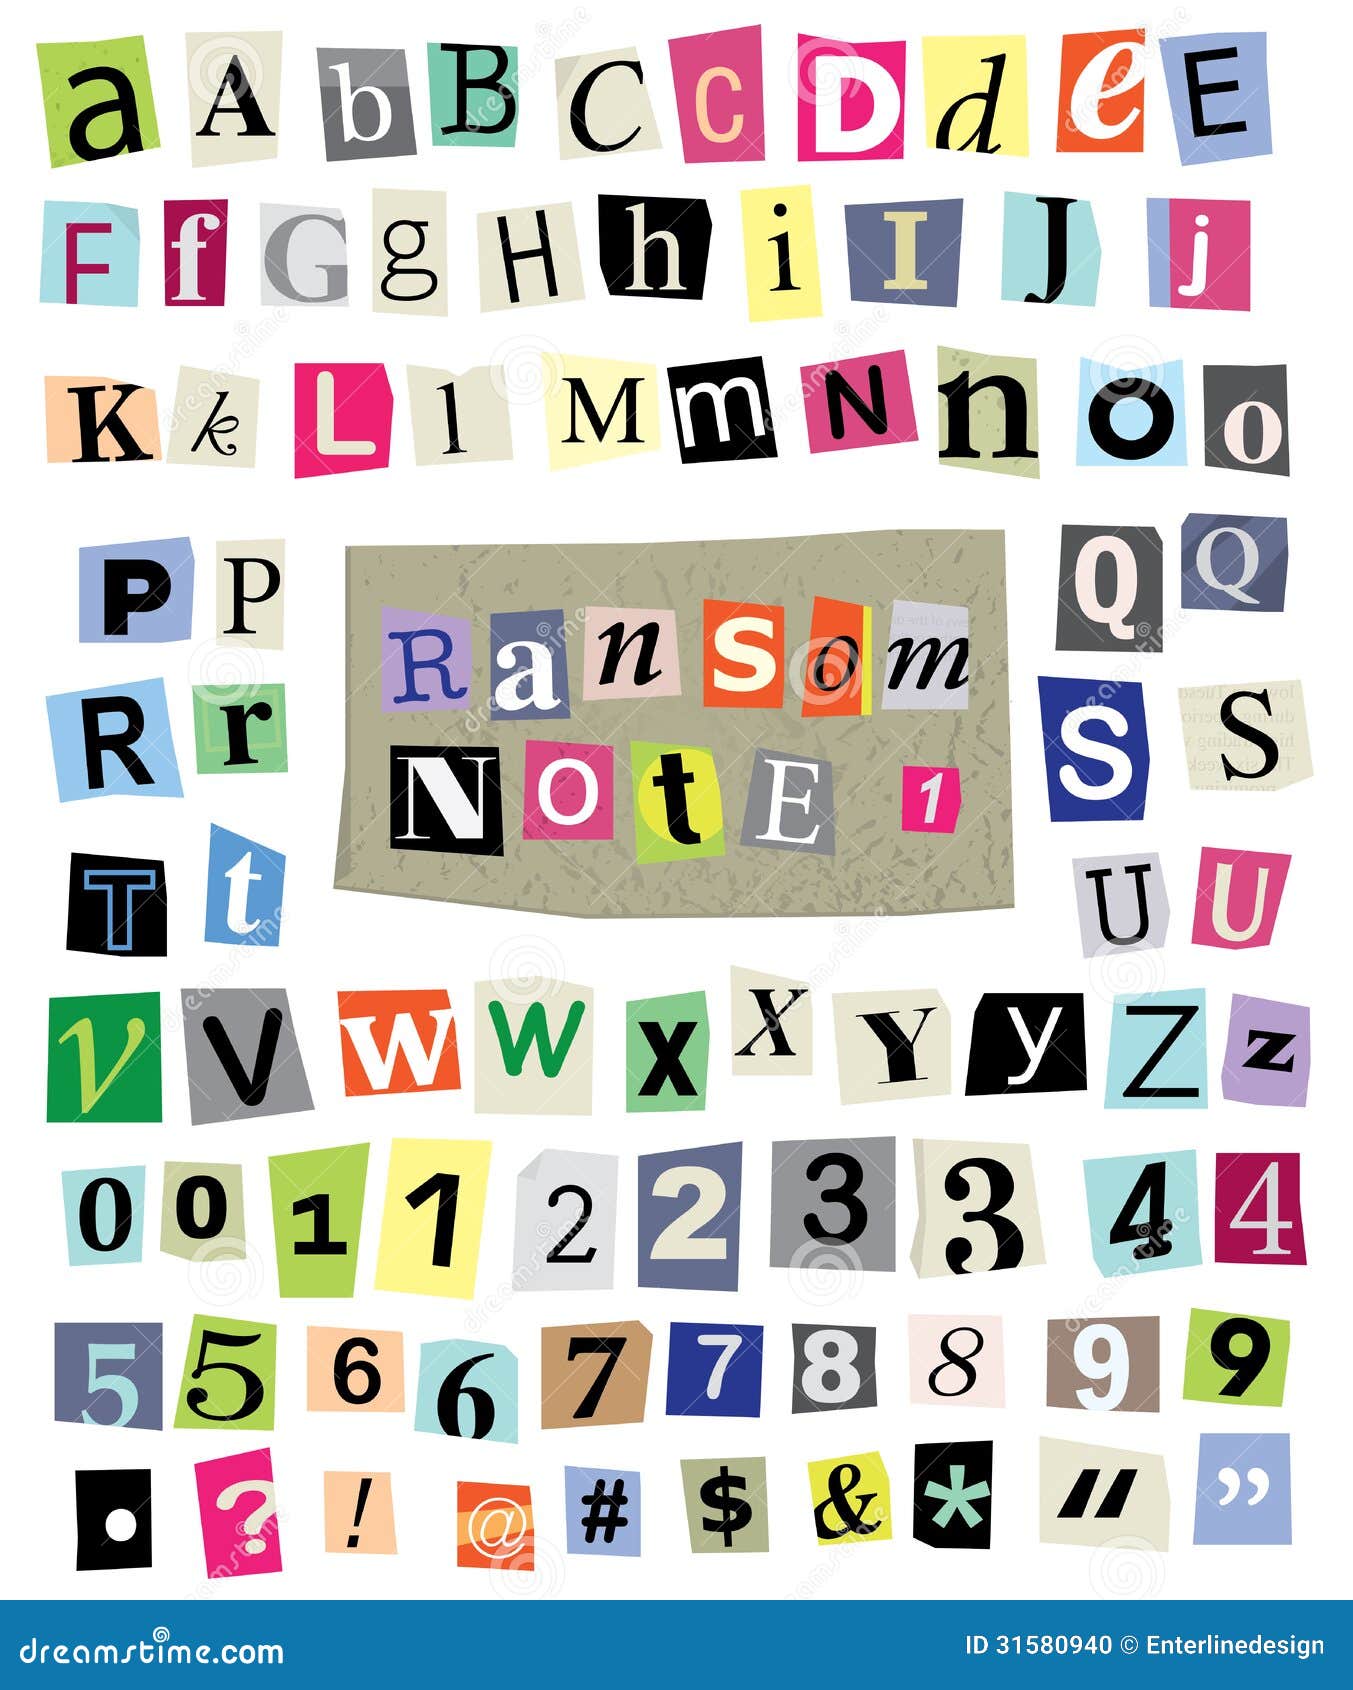  ransom note #1- cut paper letters, numbers, s